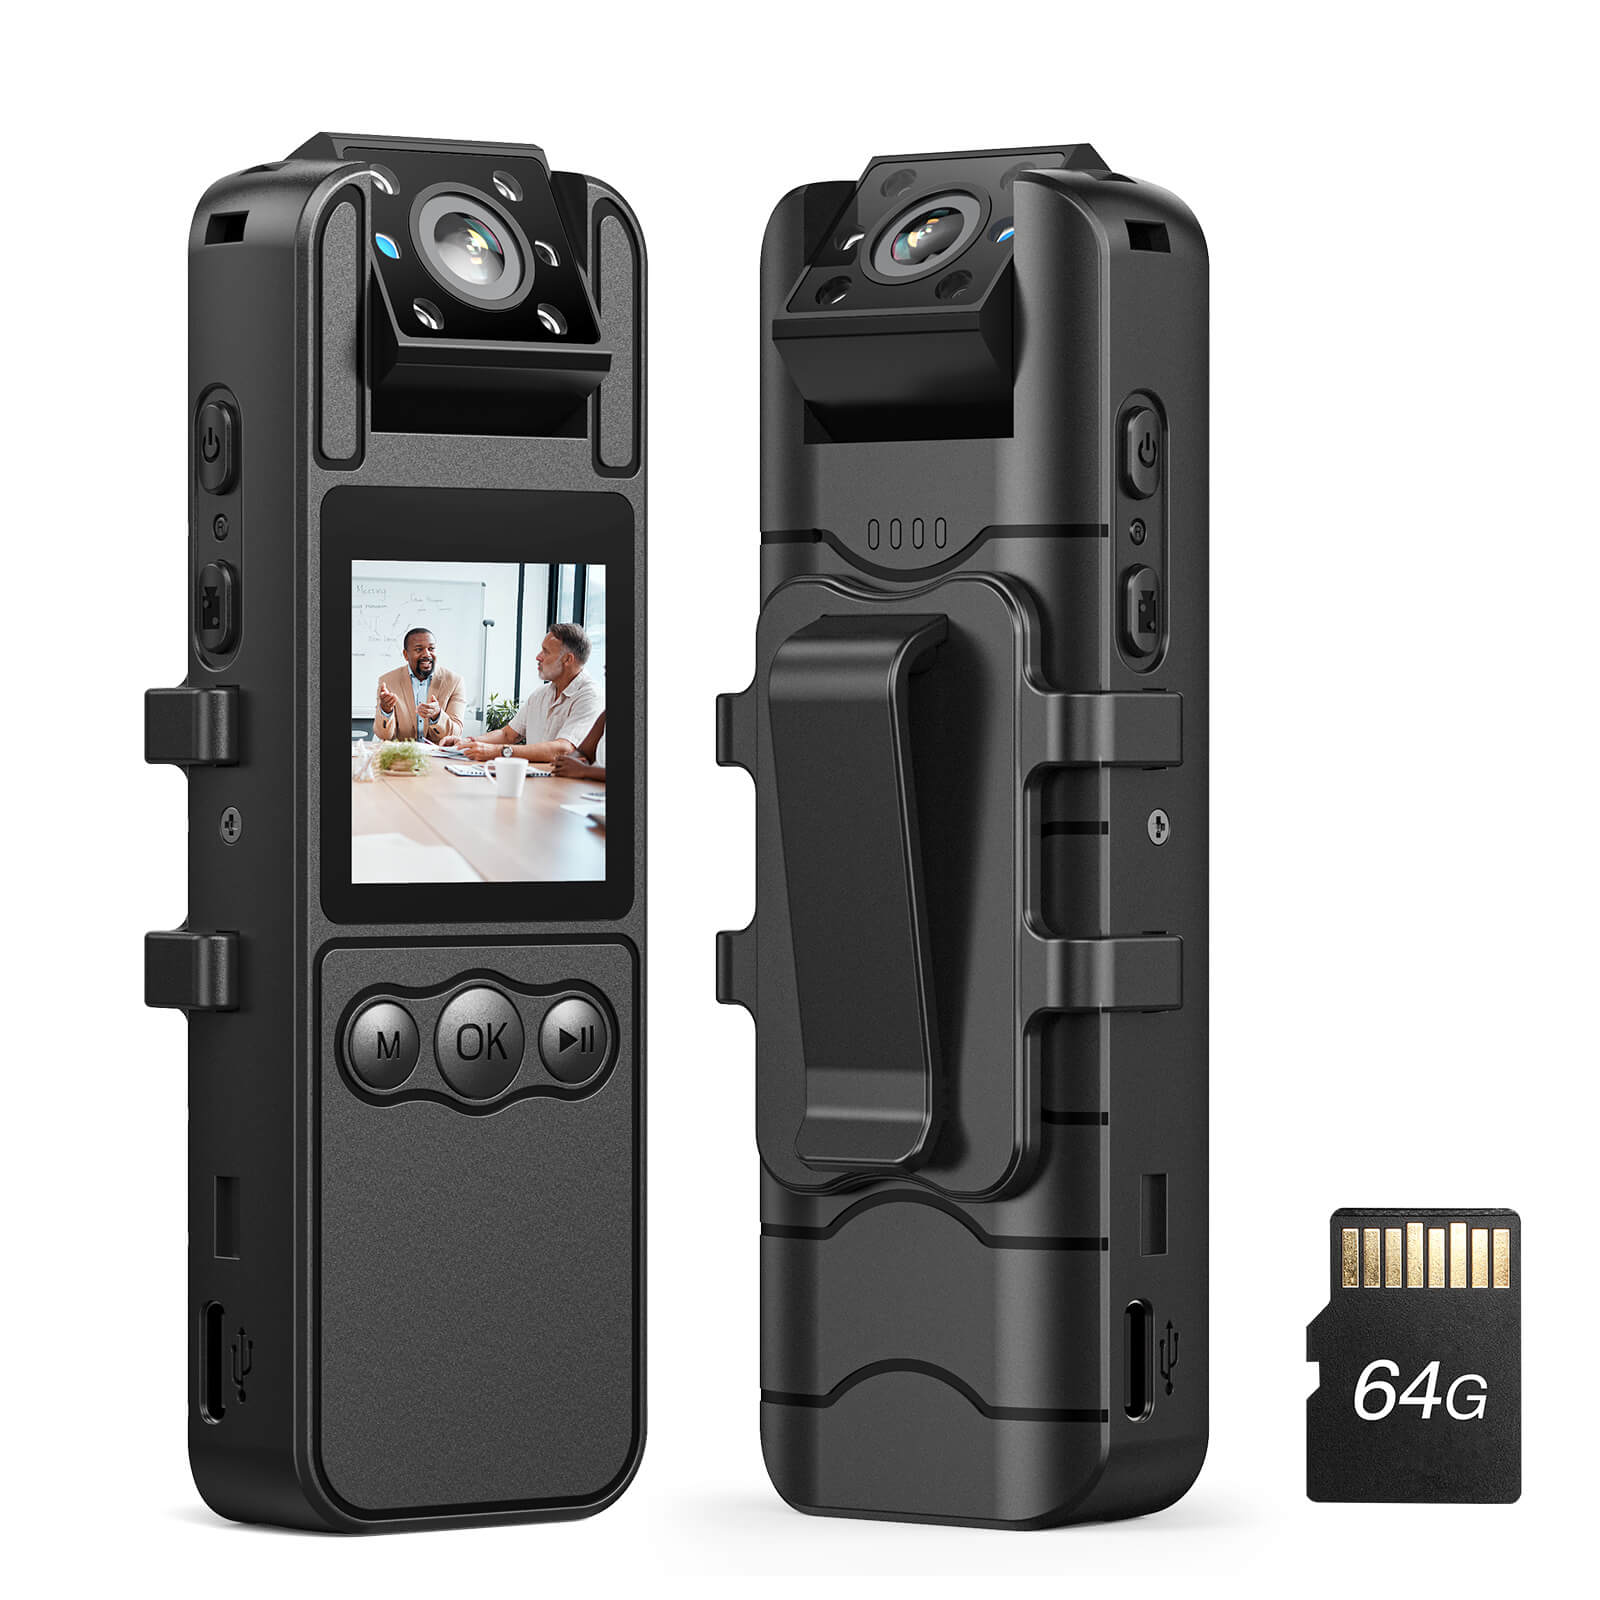 BOBLOV A26 64GB HD 1080p Body Camera, 6 Hrs Video Recording, Tripod Included for Monitoring, Wearable Video Camera for Service, Delivery Recording, Collect Evidence